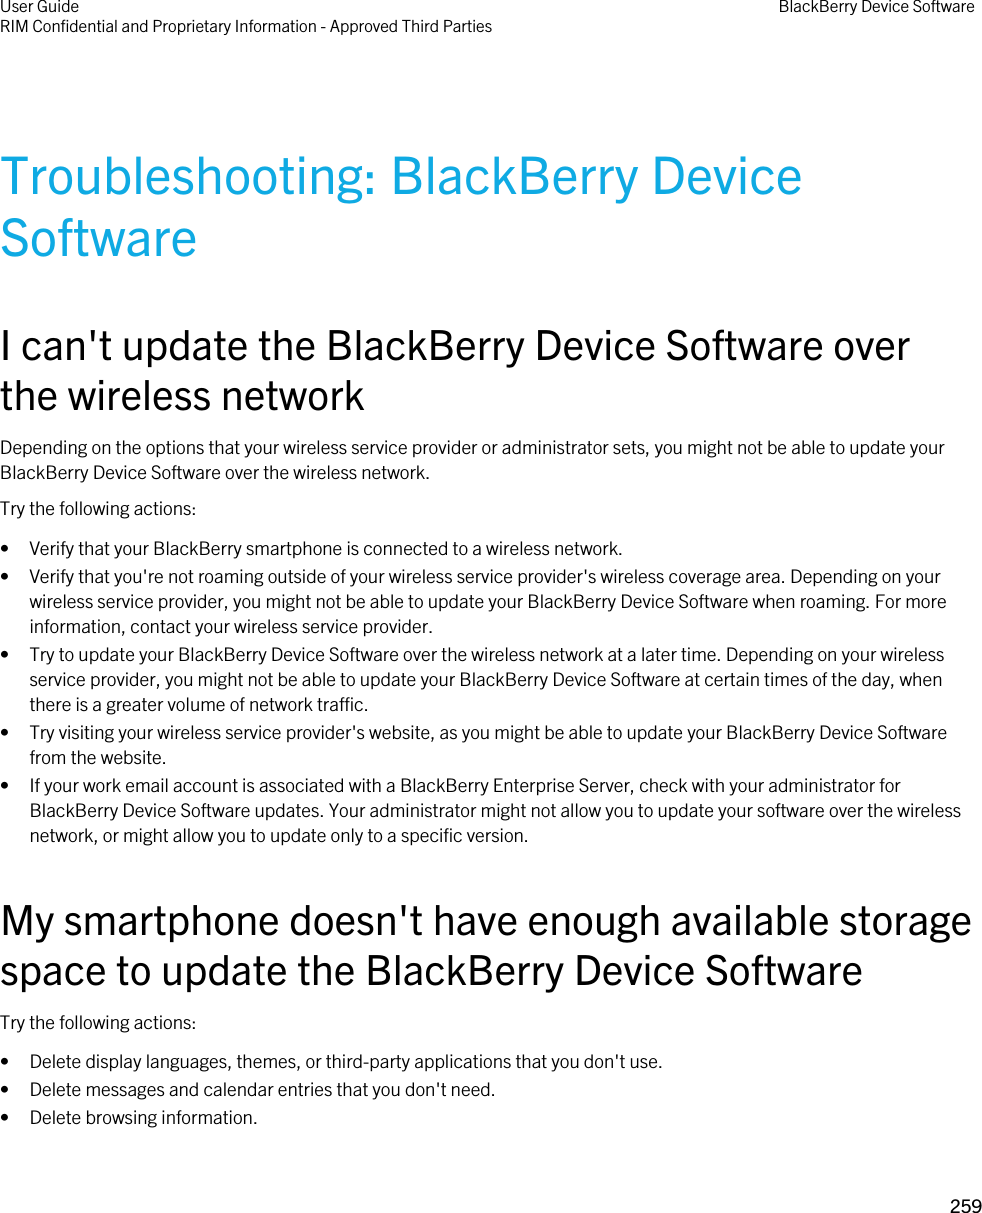 Troubleshooting: BlackBerry Device SoftwareI can&apos;t update the BlackBerry Device Software over the wireless networkDepending on the options that your wireless service provider or administrator sets, you might not be able to update your BlackBerry Device Software over the wireless network.Try the following actions:• Verify that your BlackBerry smartphone is connected to a wireless network.• Verify that you&apos;re not roaming outside of your wireless service provider&apos;s wireless coverage area. Depending on your wireless service provider, you might not be able to update your BlackBerry Device Software when roaming. For more information, contact your wireless service provider.• Try to update your BlackBerry Device Software over the wireless network at a later time. Depending on your wireless service provider, you might not be able to update your BlackBerry Device Software at certain times of the day, when there is a greater volume of network traffic.• Try visiting your wireless service provider&apos;s website, as you might be able to update your BlackBerry Device Software from the website.• If your work email account is associated with a BlackBerry Enterprise Server, check with your administrator for BlackBerry Device Software updates. Your administrator might not allow you to update your software over the wireless network, or might allow you to update only to a specific version.My smartphone doesn&apos;t have enough available storage space to update the BlackBerry Device SoftwareTry the following actions:• Delete display languages, themes, or third-party applications that you don&apos;t use.• Delete messages and calendar entries that you don&apos;t need.• Delete browsing information.User GuideRIM Confidential and Proprietary Information - Approved Third Parties BlackBerry Device Software259 